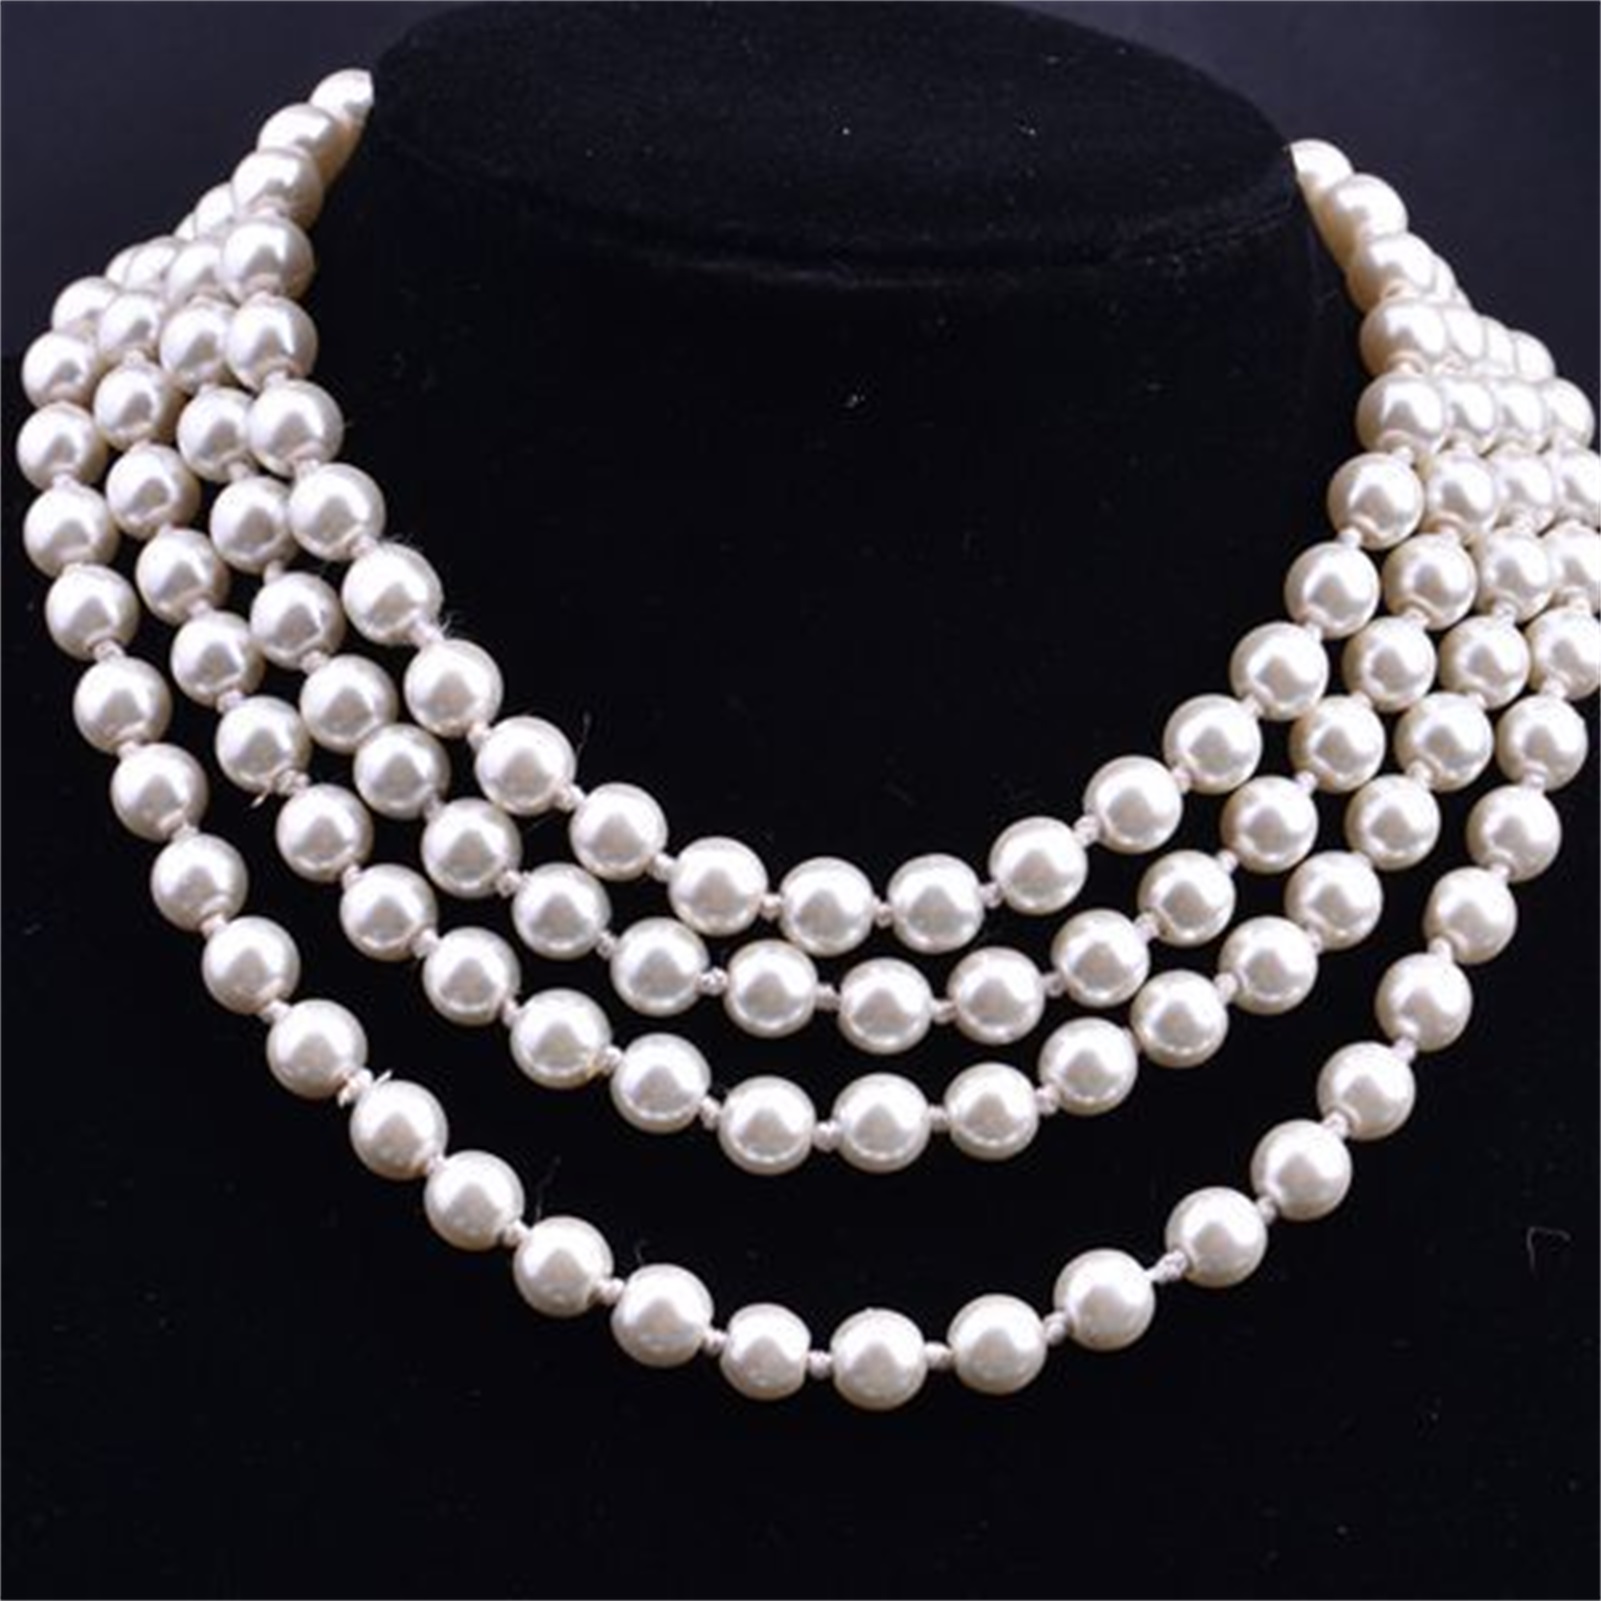 Meidiya 150cm Fashion Knot Simulated Pearl Necklace Tassel Multi-layer Long Chain Necklace Female Fashion Sweater Dress Accessories - image 3 of 8